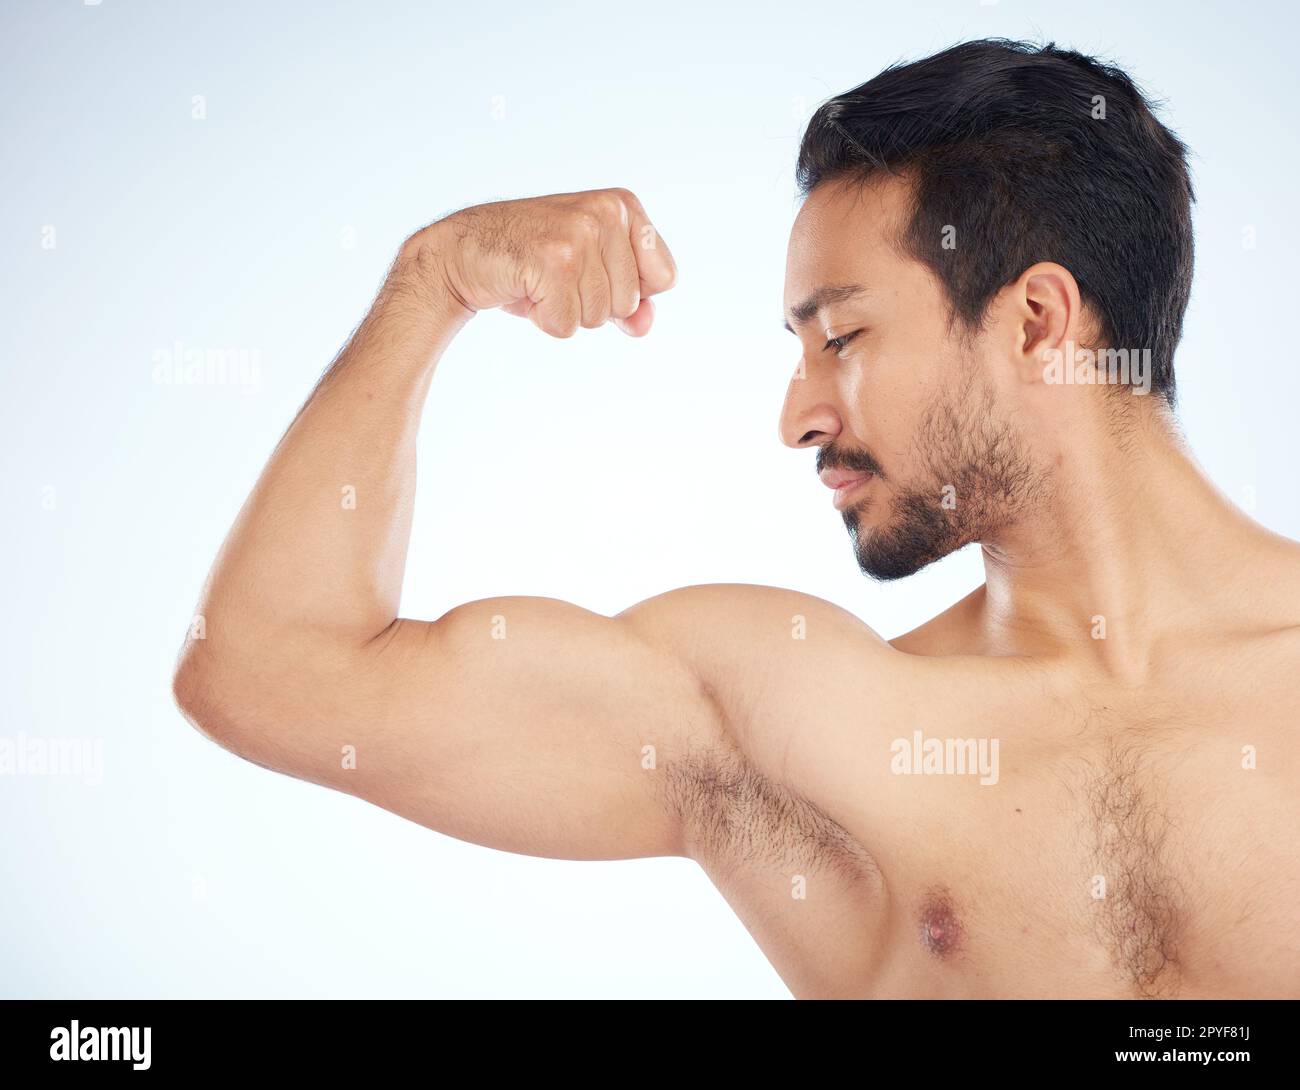 Asian Man Body Of Bicep Flex On Studio Background In Studio For Muscle Growth Progress Healthcare Wellness Check Or Bodybuilding Success Sports Athlete Or Bodybuilder Flexing Arm In Fitness 2PYF81J 